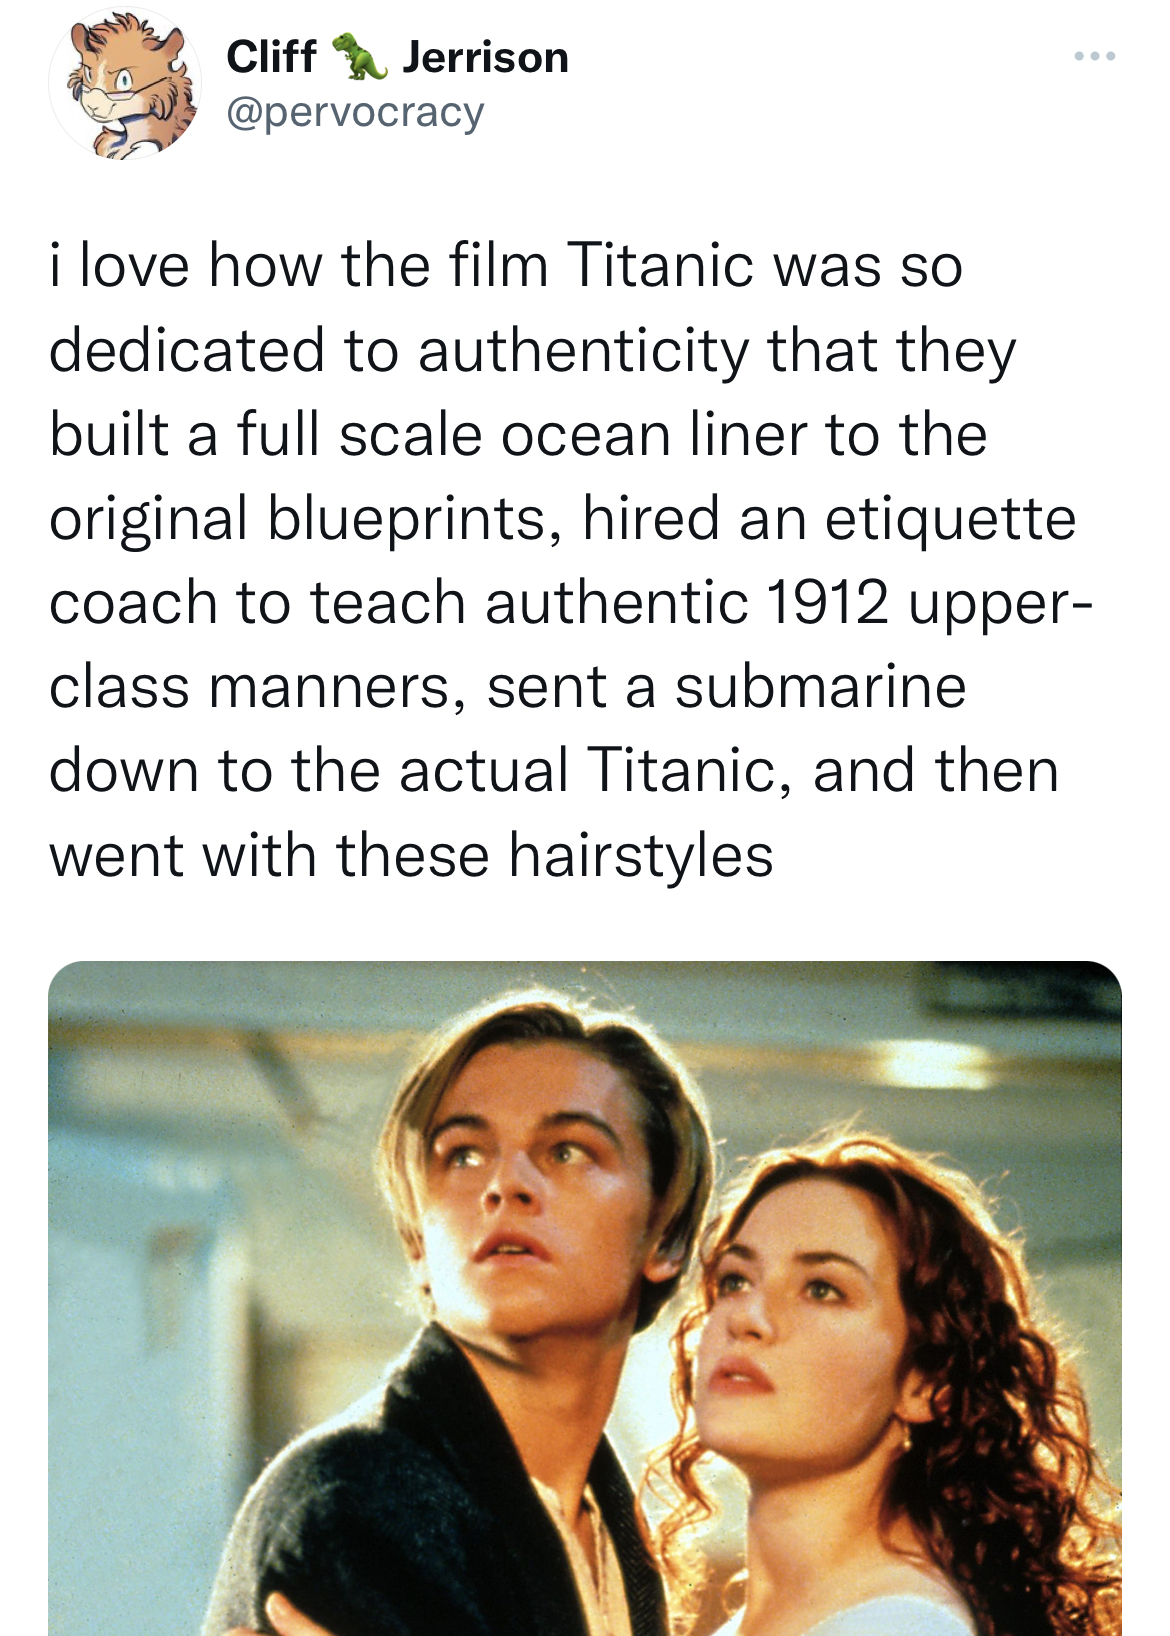 celeb roasts of the week - titanic leonardo dicaprio - Cliff Jerrison i love how the film Titanic was so dedicated to authenticity that they built a full scale oan liner to the original blueprints, hired an etiquette coach to teach authentic 1912 upper cl